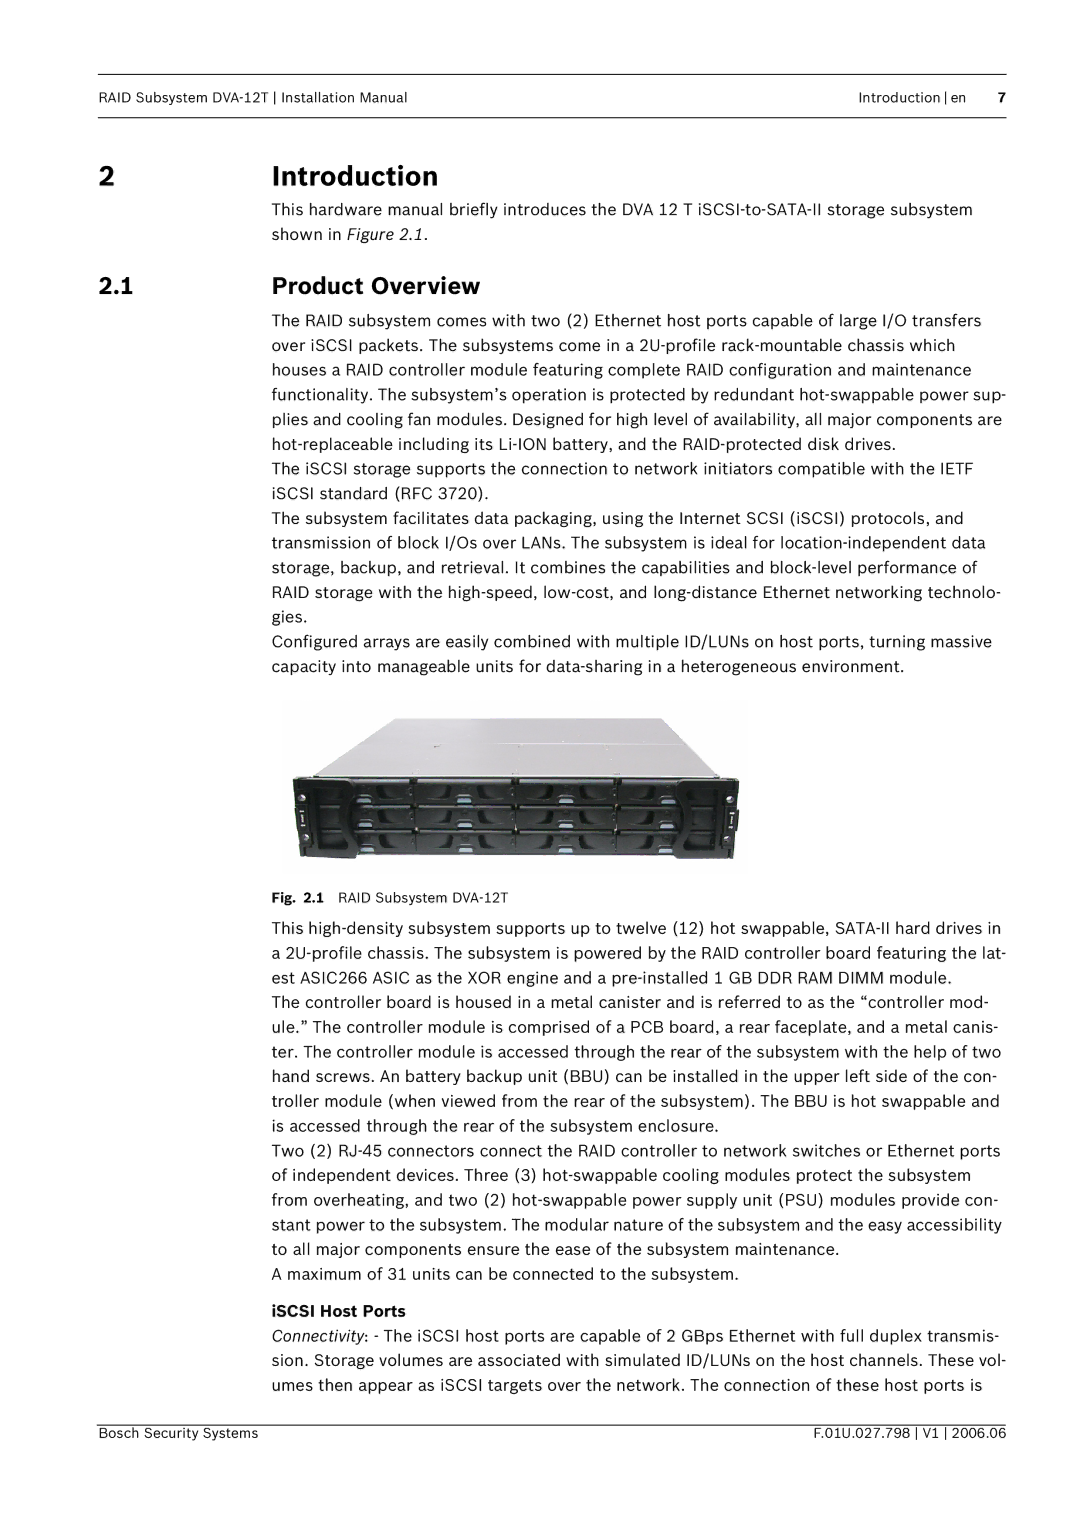 Bosch Appliances DVA-12T installation manual Introduction, Product Overview, ISCSI Host Ports 